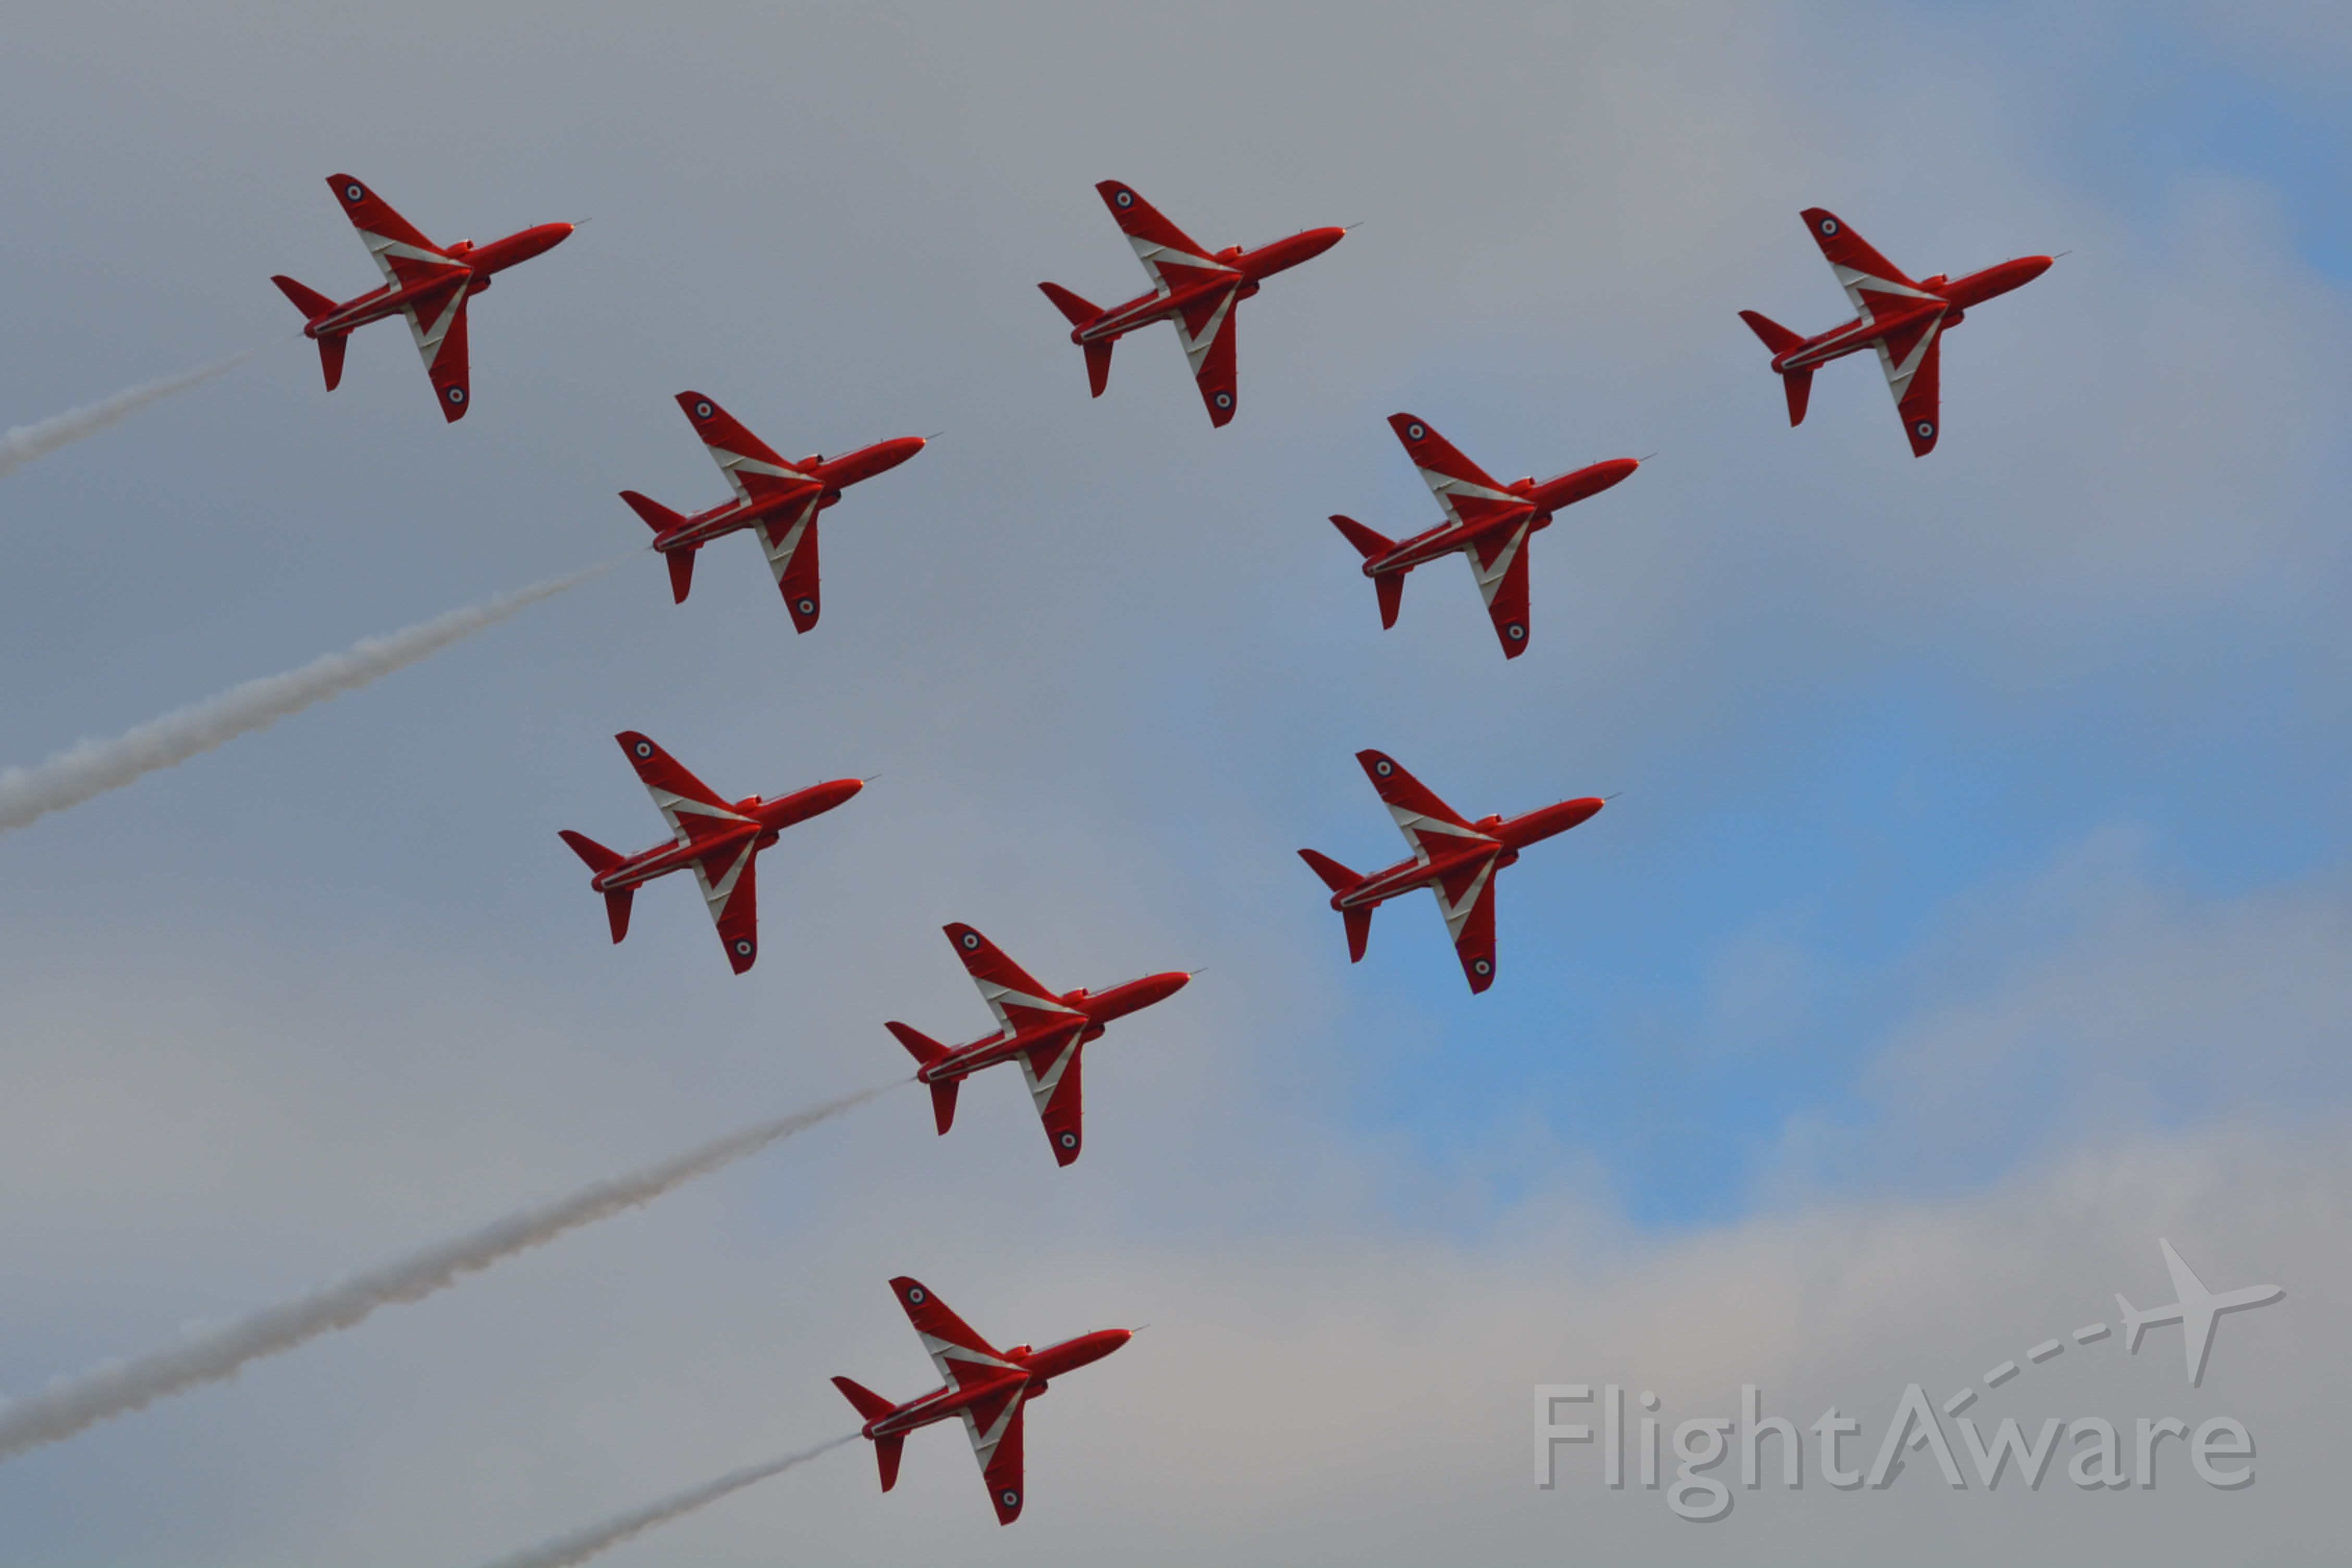 Boeing Goshawk (MULTIPLE) - The Red Arrows at Duxford Airshow 20 Sep 2015